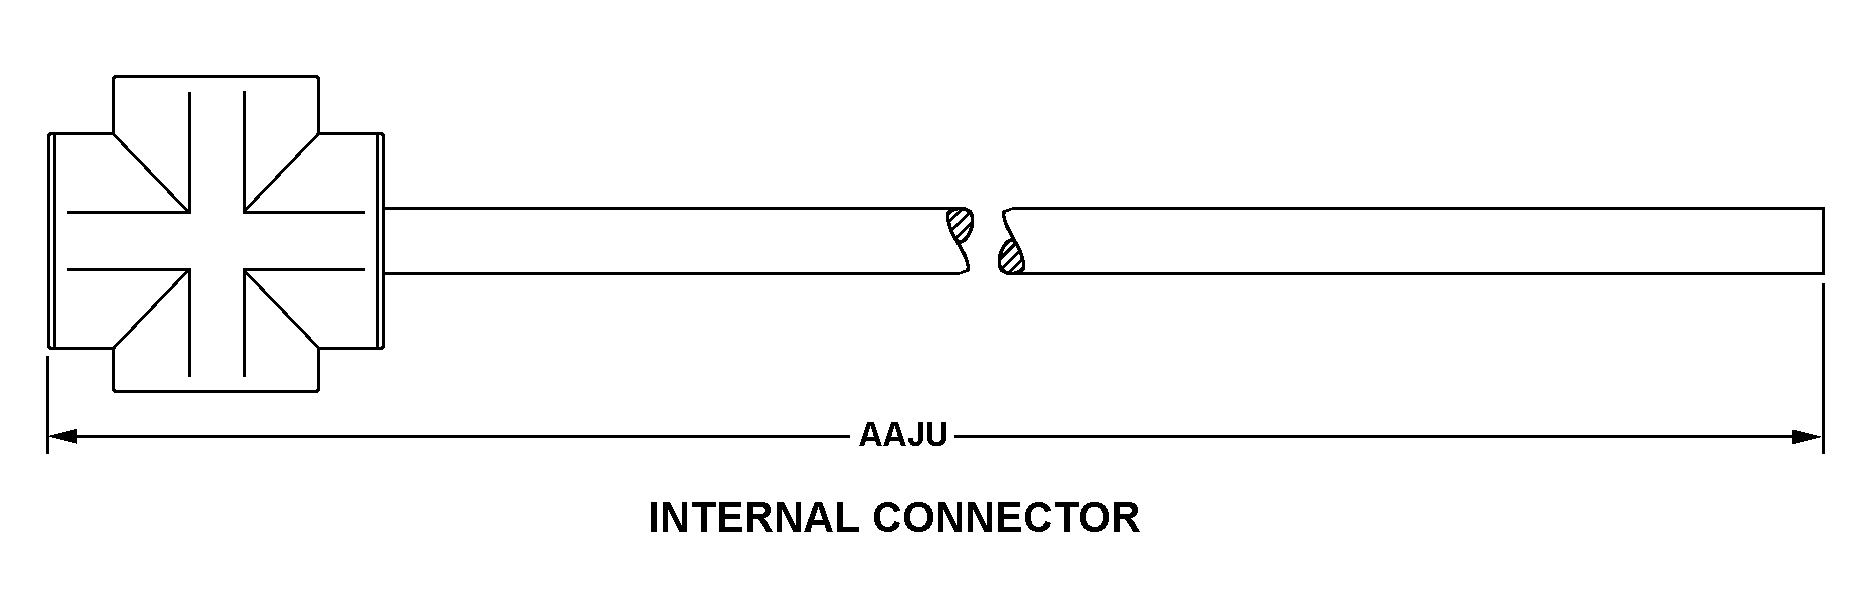 INTERNAL CONNECTOR style nsn 5995-01-398-1538